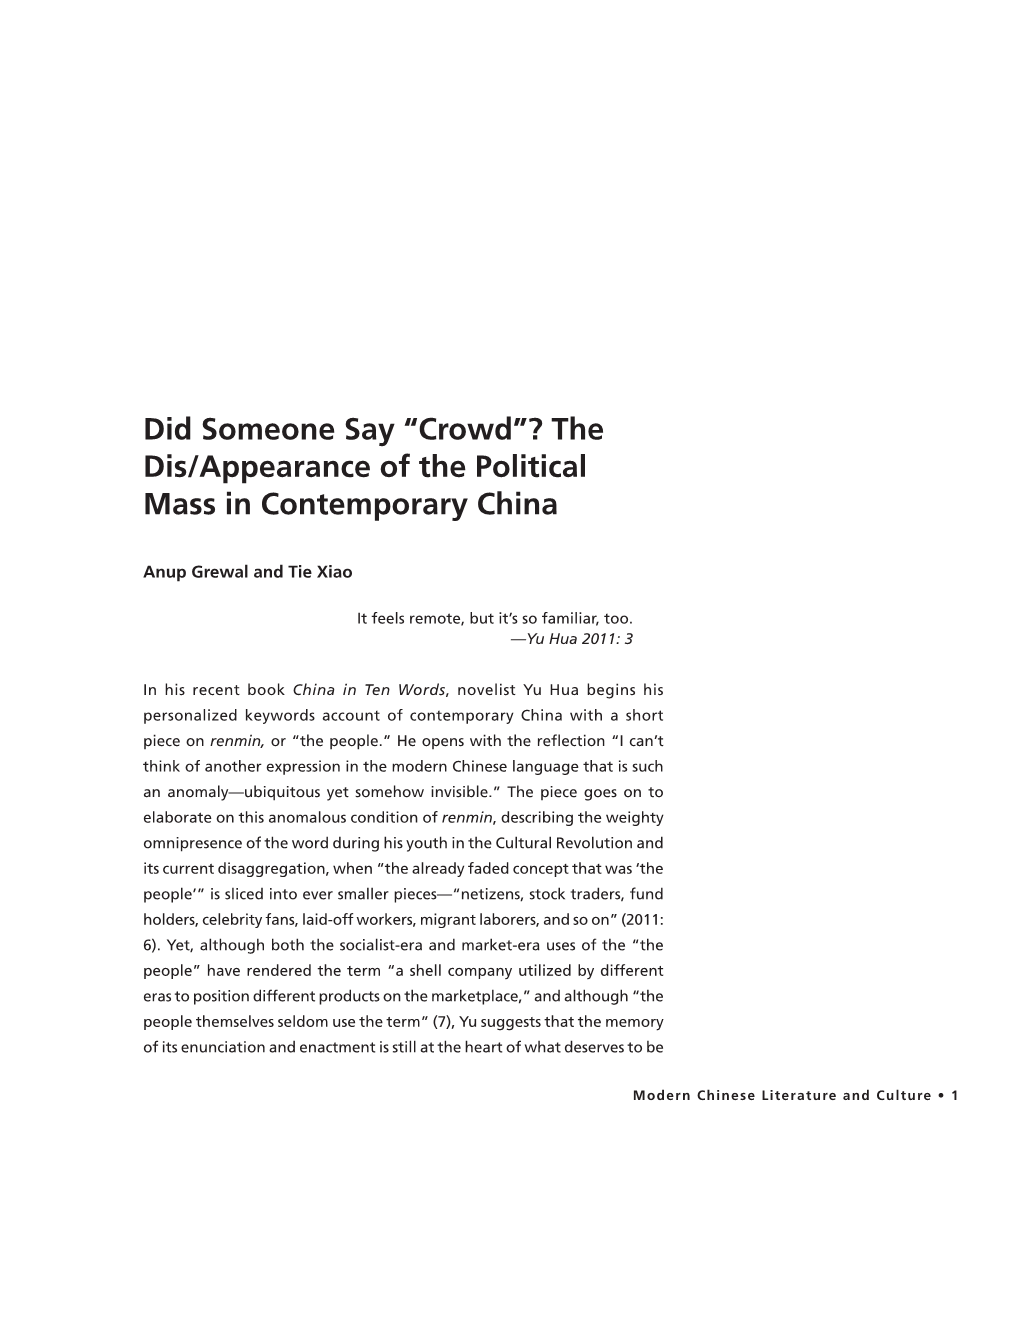 “Crowd”? the Dis/Appearance of the Political Mass in Contemporary China